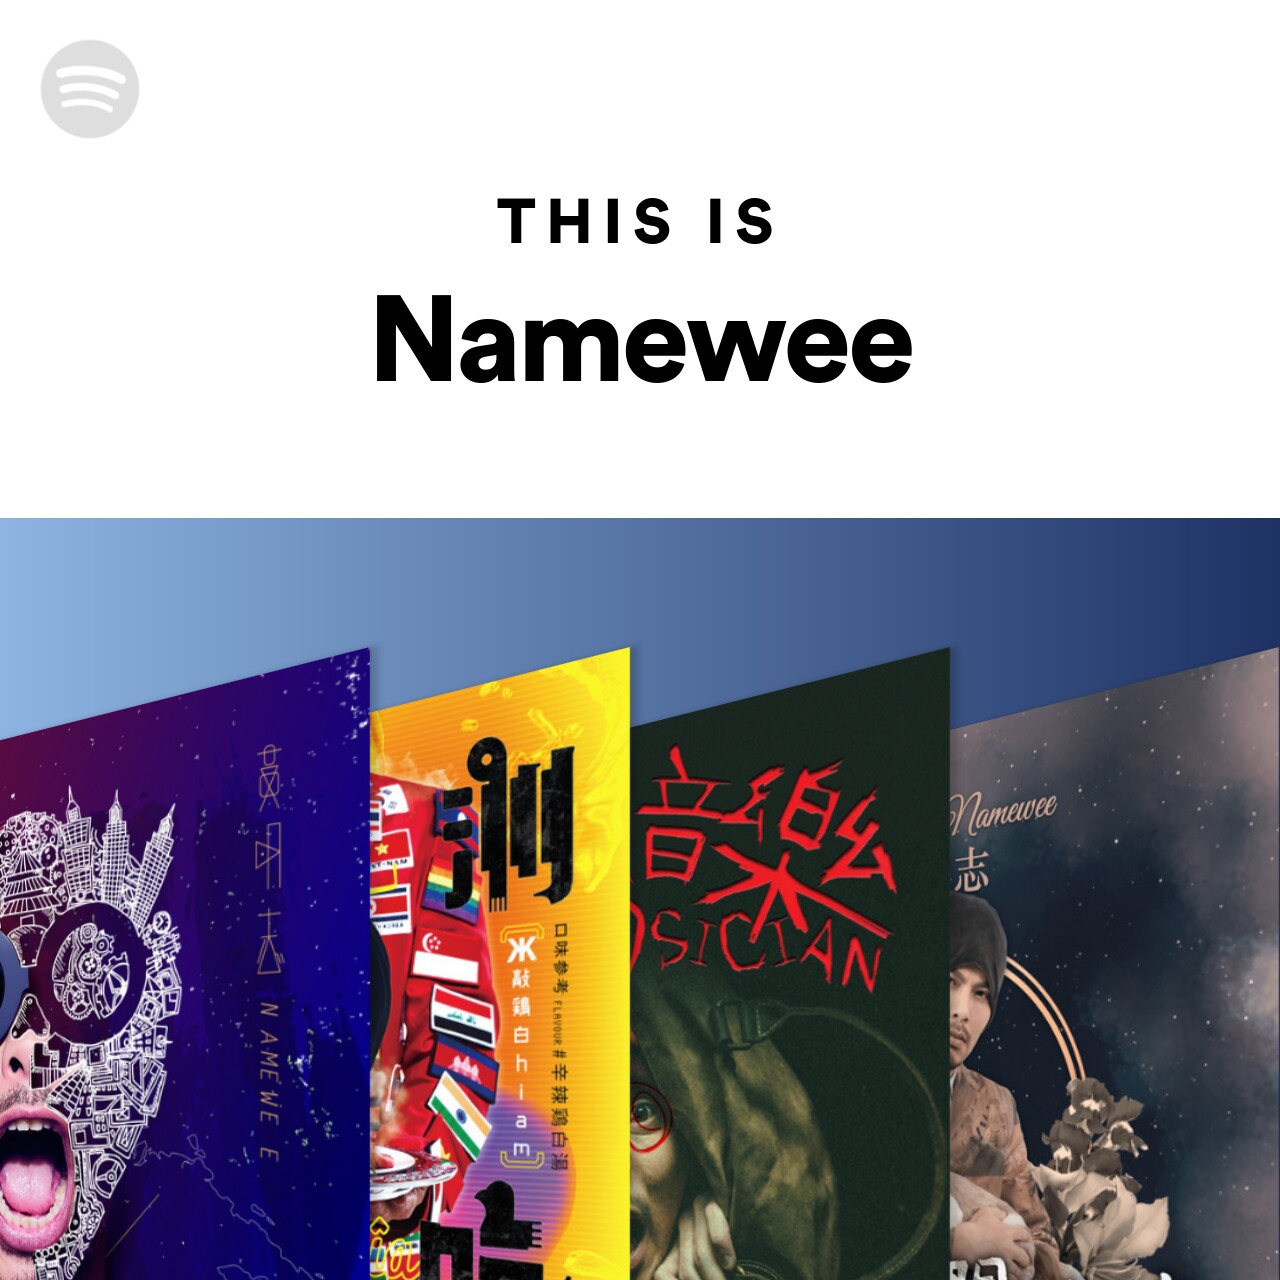 This Is Namewee by spotify Spotify Playlist